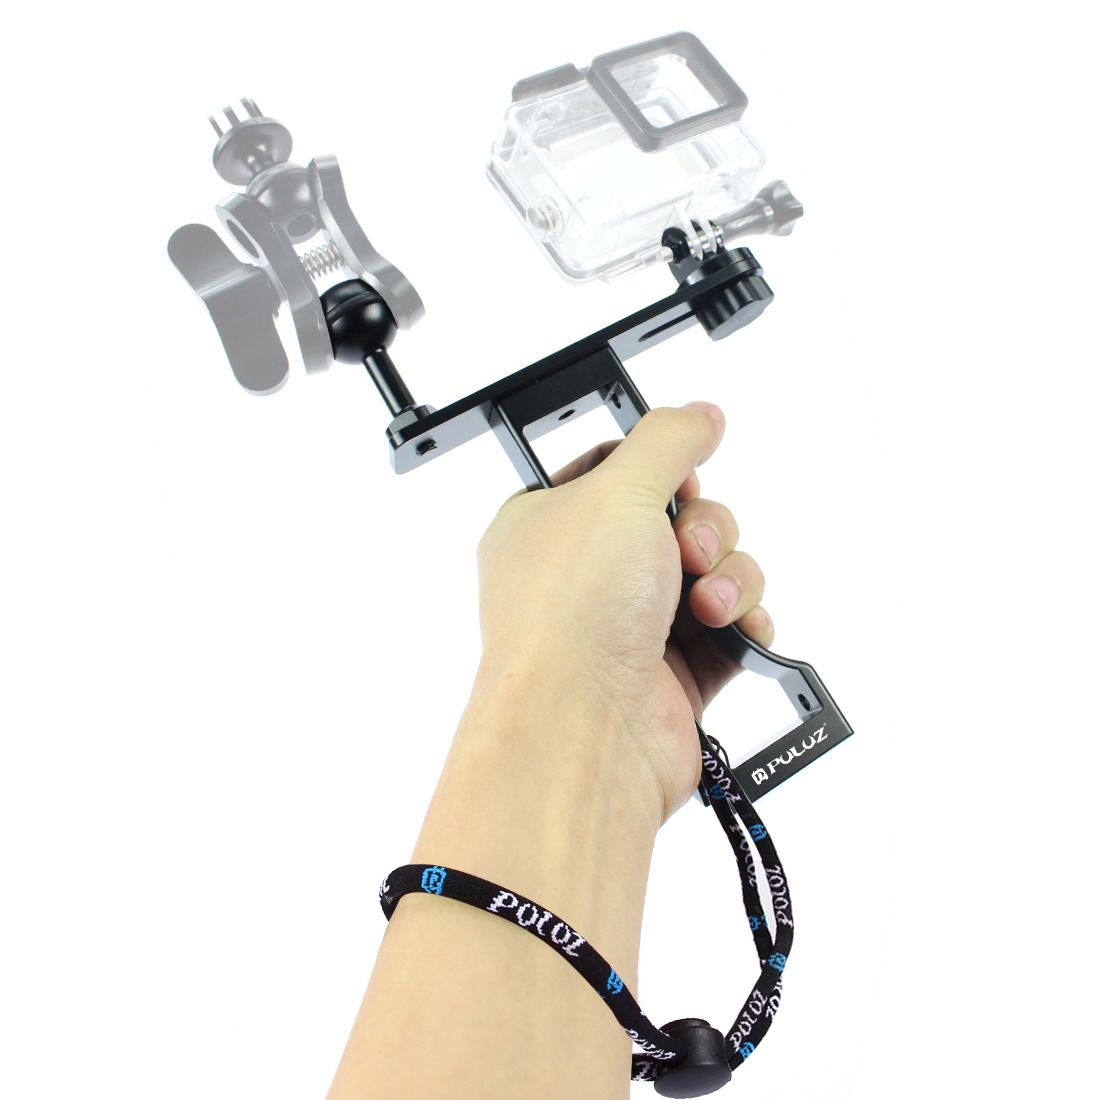 PULUZ-PU246B-Diving-Video-Light-Stand-Stabilizer-Mount-Holder-for-GoPro-Hero-DJI-OSMO-Pocket-Action--1569170